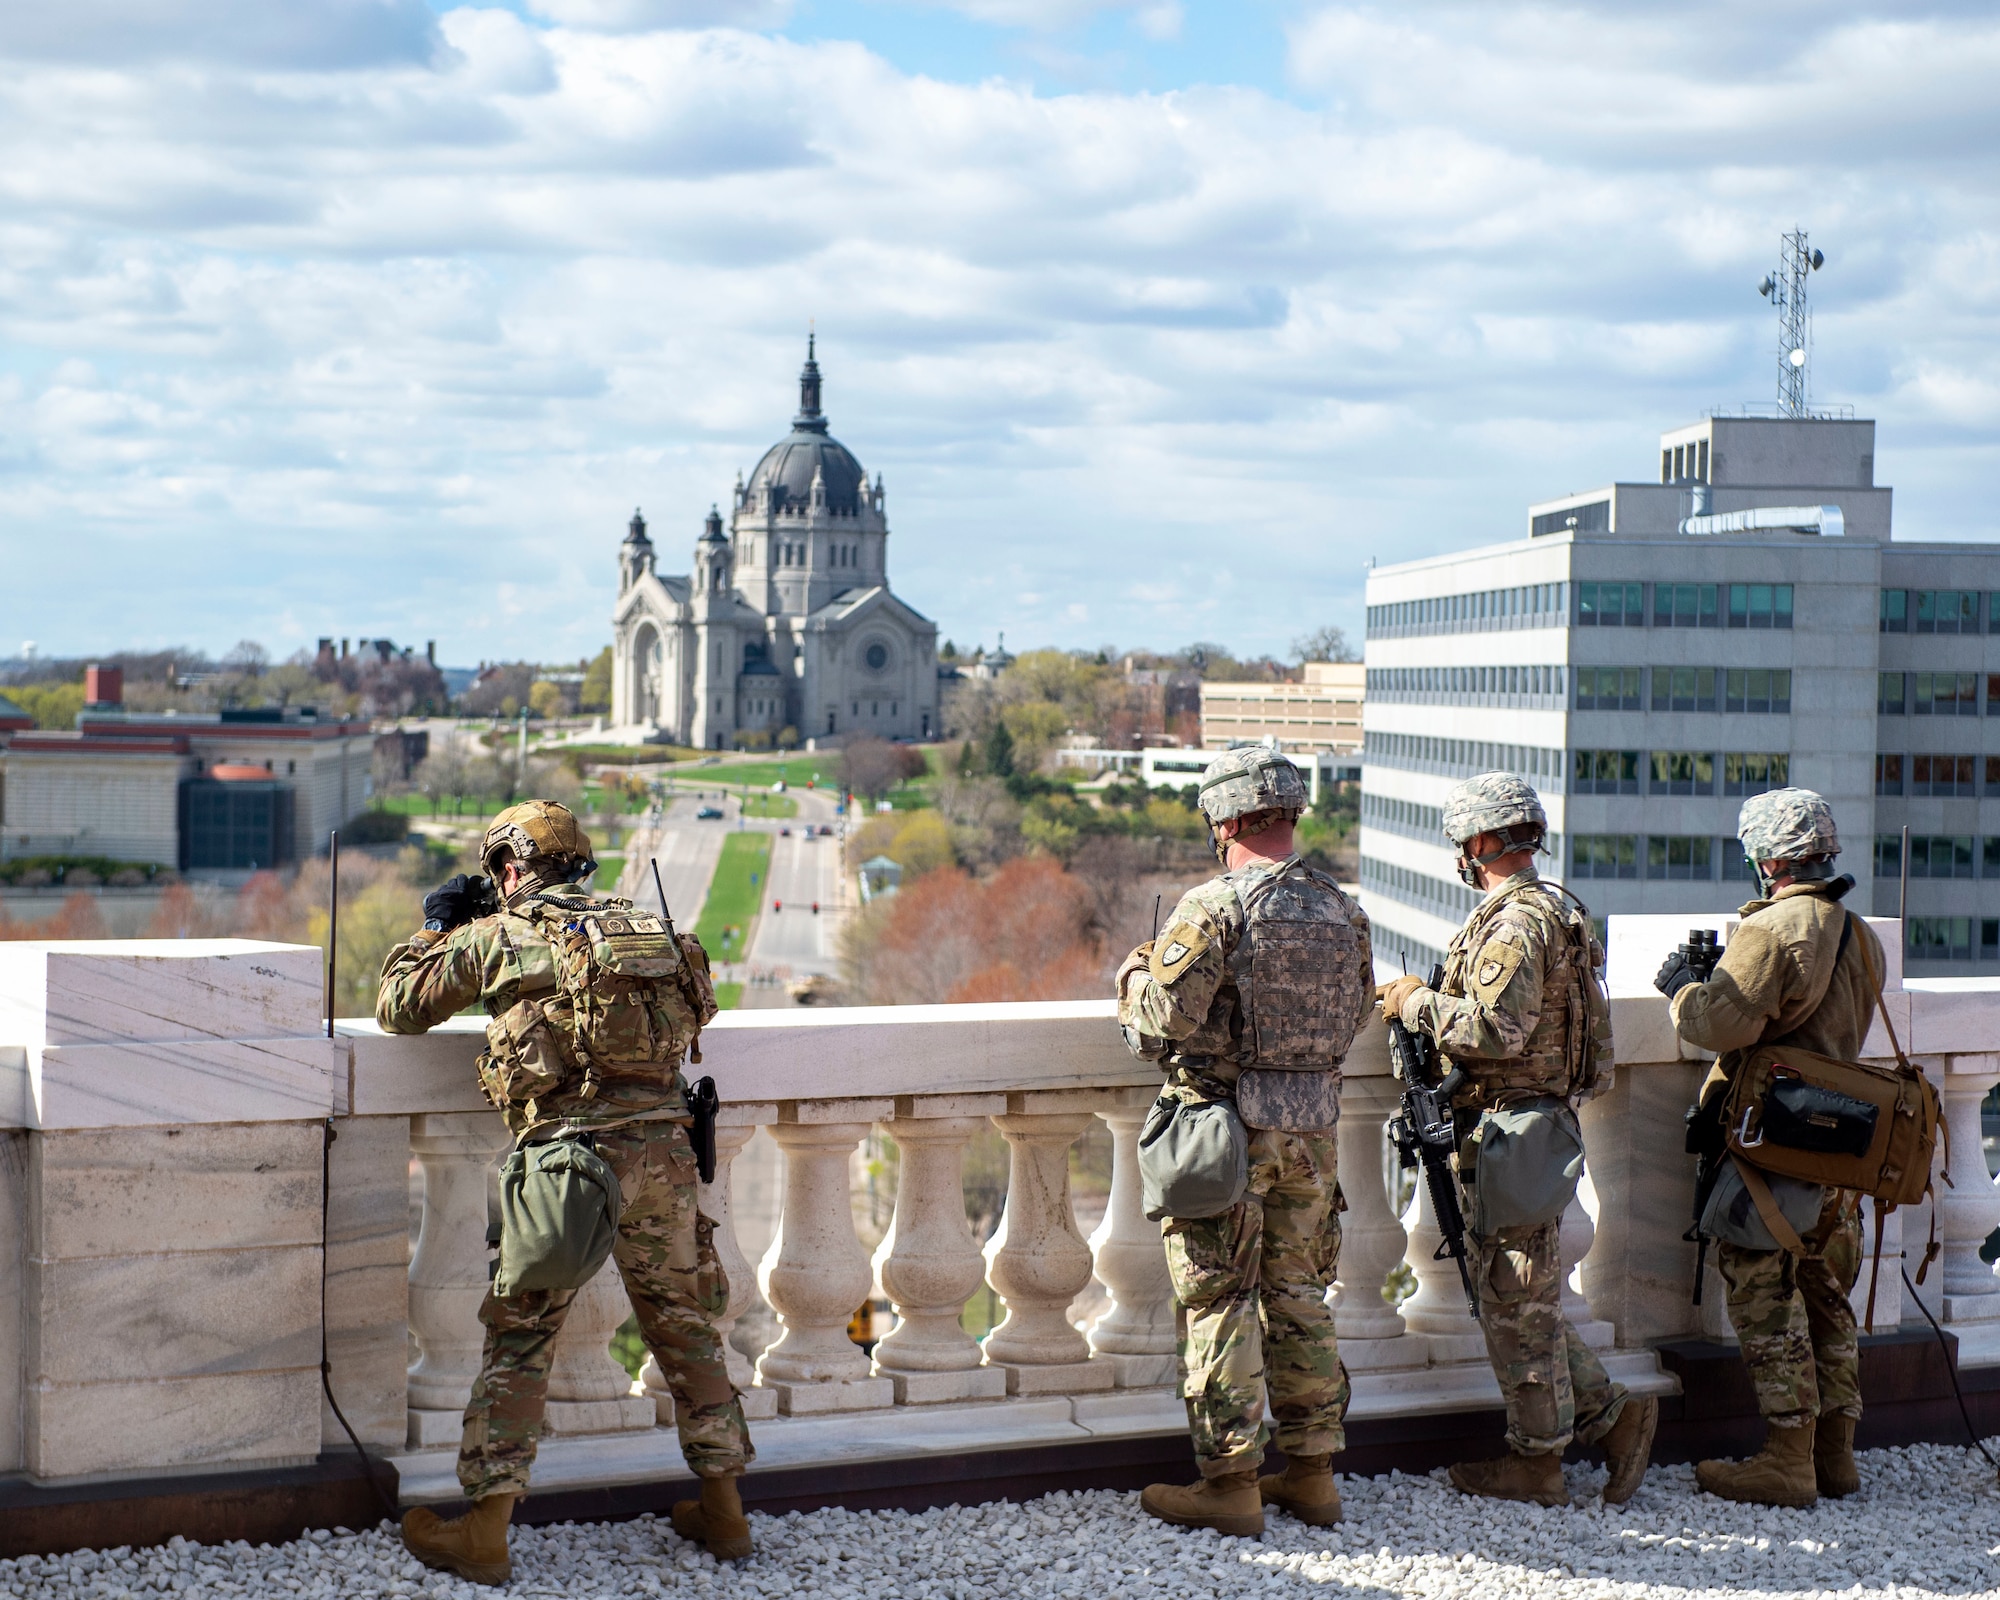 U.S. Air Force Airmen support security missions during Operation Safety Net in St. Paul, Minn., Apr. 20, 2021.